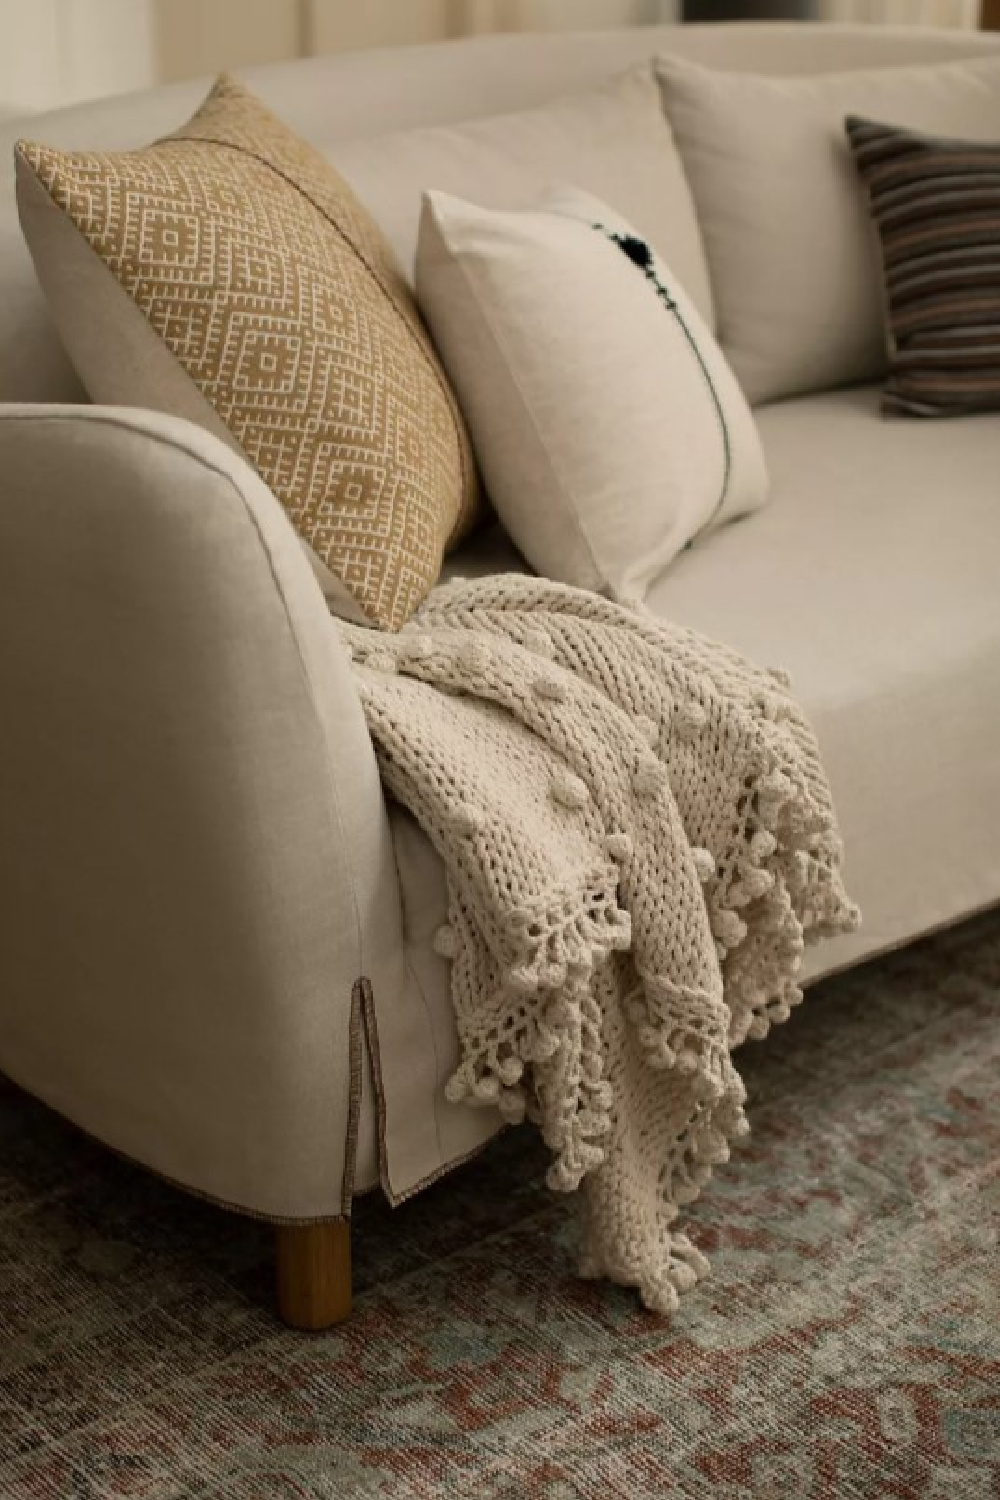 Knit throw by Amber Lewis on a beautiful modern rustic sofa. #knitthrow #modernrustic #amberlewis